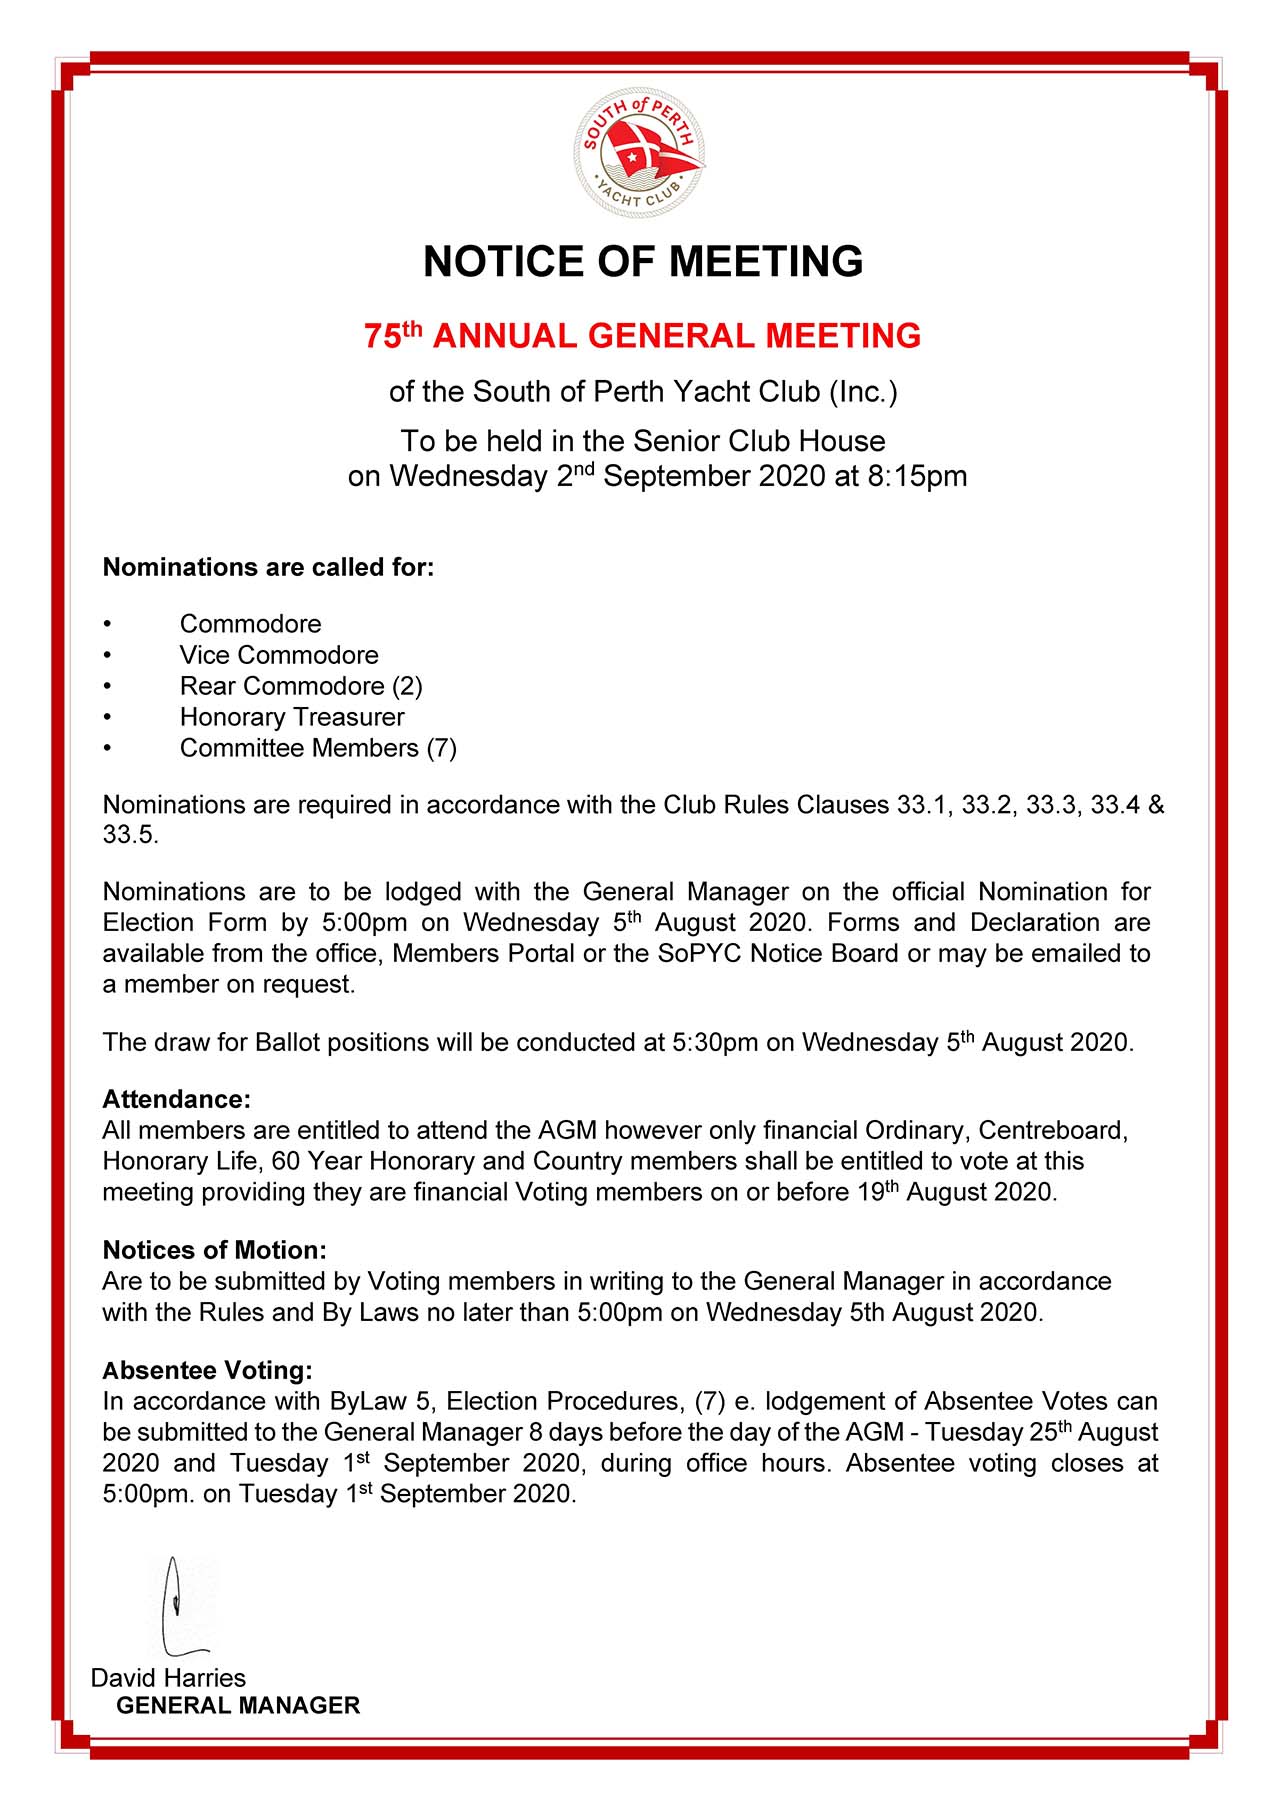 Notice to Members - AGM 2020